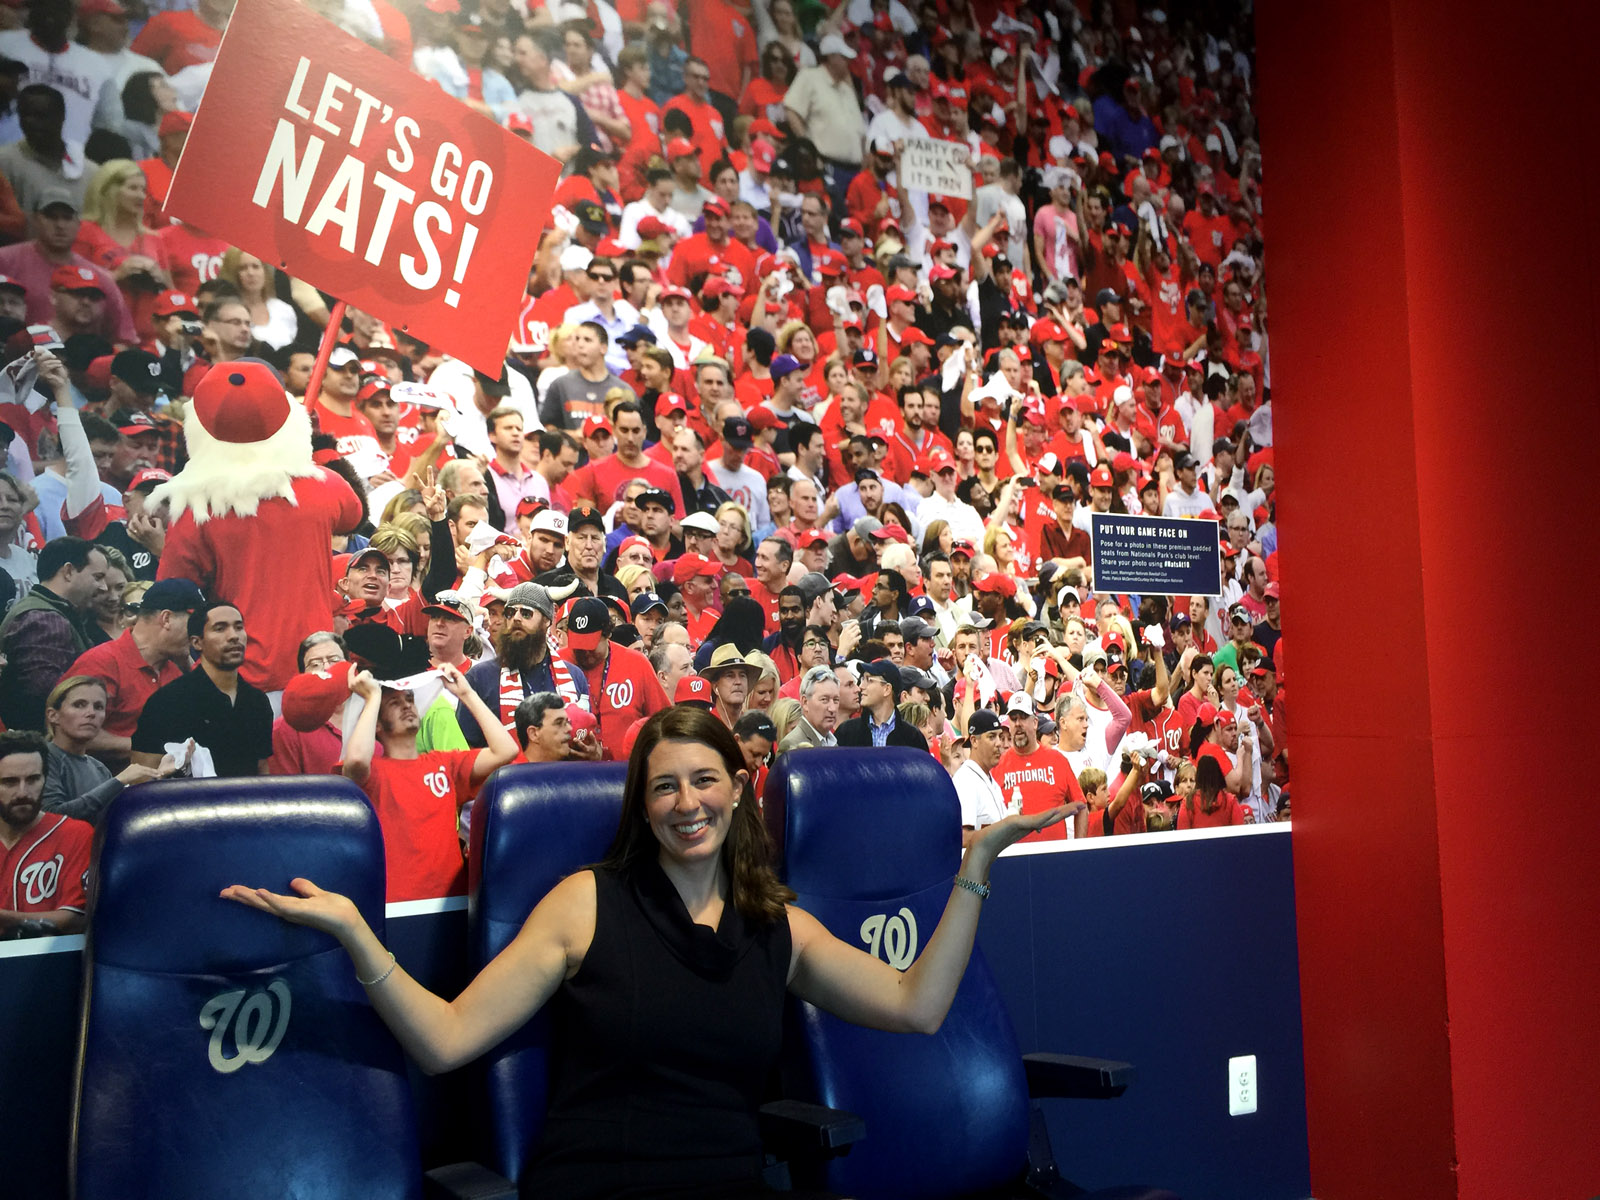 Frugal fans accustomed to the "cheap seats" can try out "premium seats" like Jennifer Giglio, Nationals vice president of communications, demonstrates at the Newseum's new exhibit featuring the first 10 years of Nationals baseball. (WTOP/Kristi King)